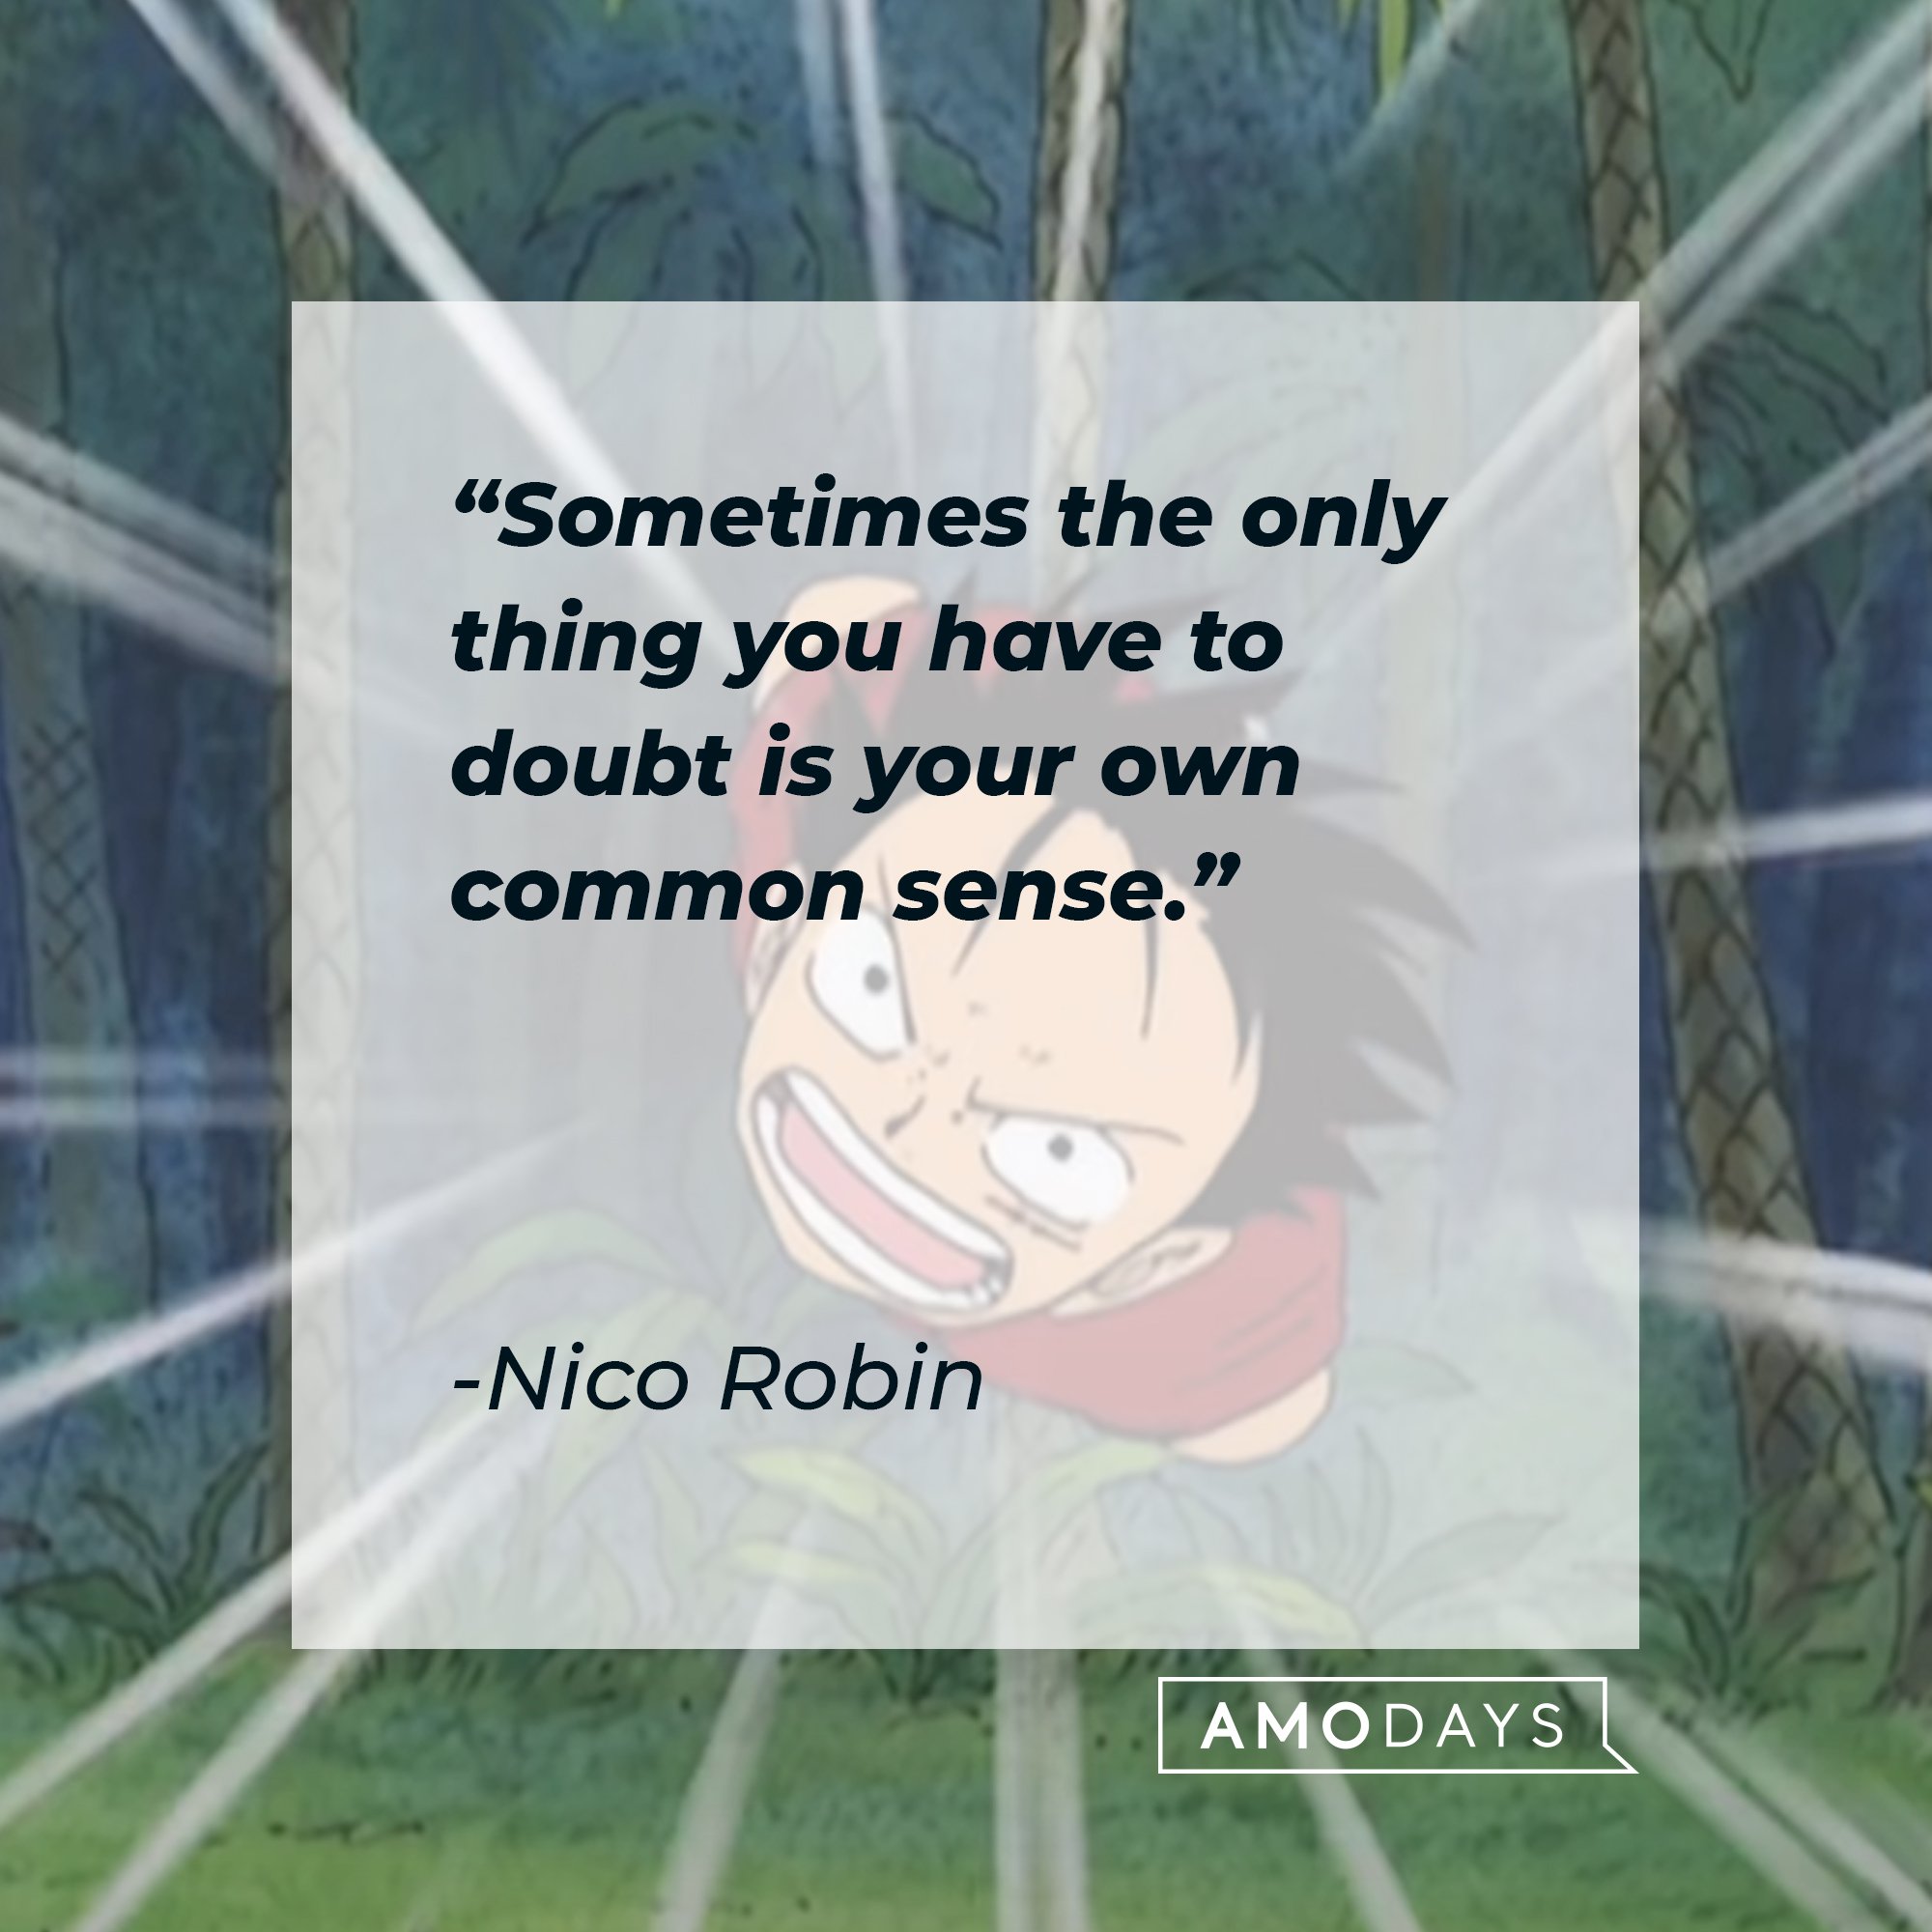 Nico Robin's quote: "Sometimes the only thing you have to doubt is your own common sense." | Image: AmoDays